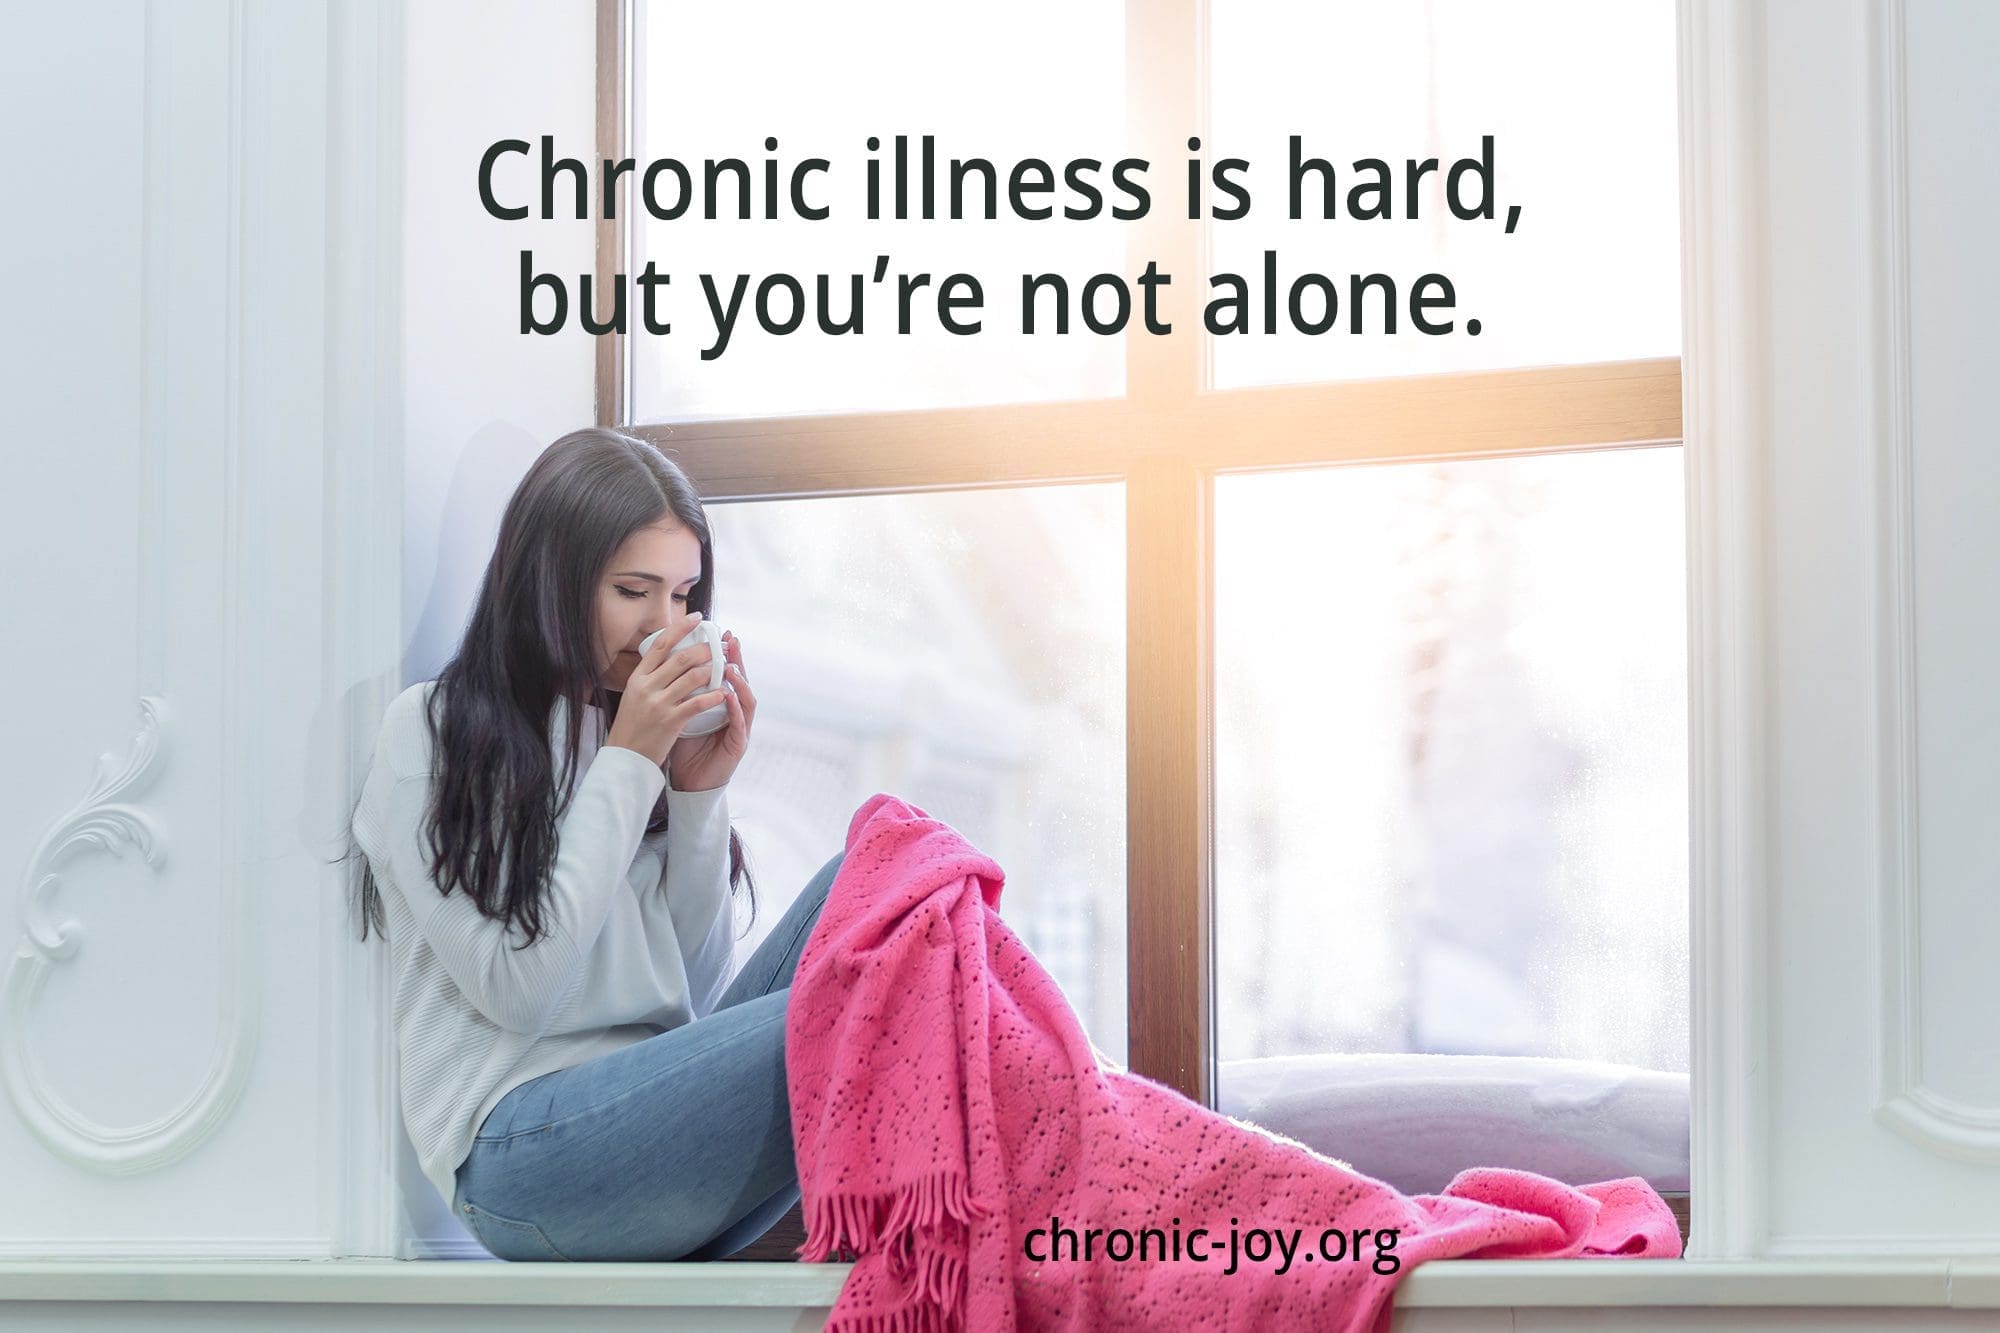 Chronic illness is hard, but you're not alone.